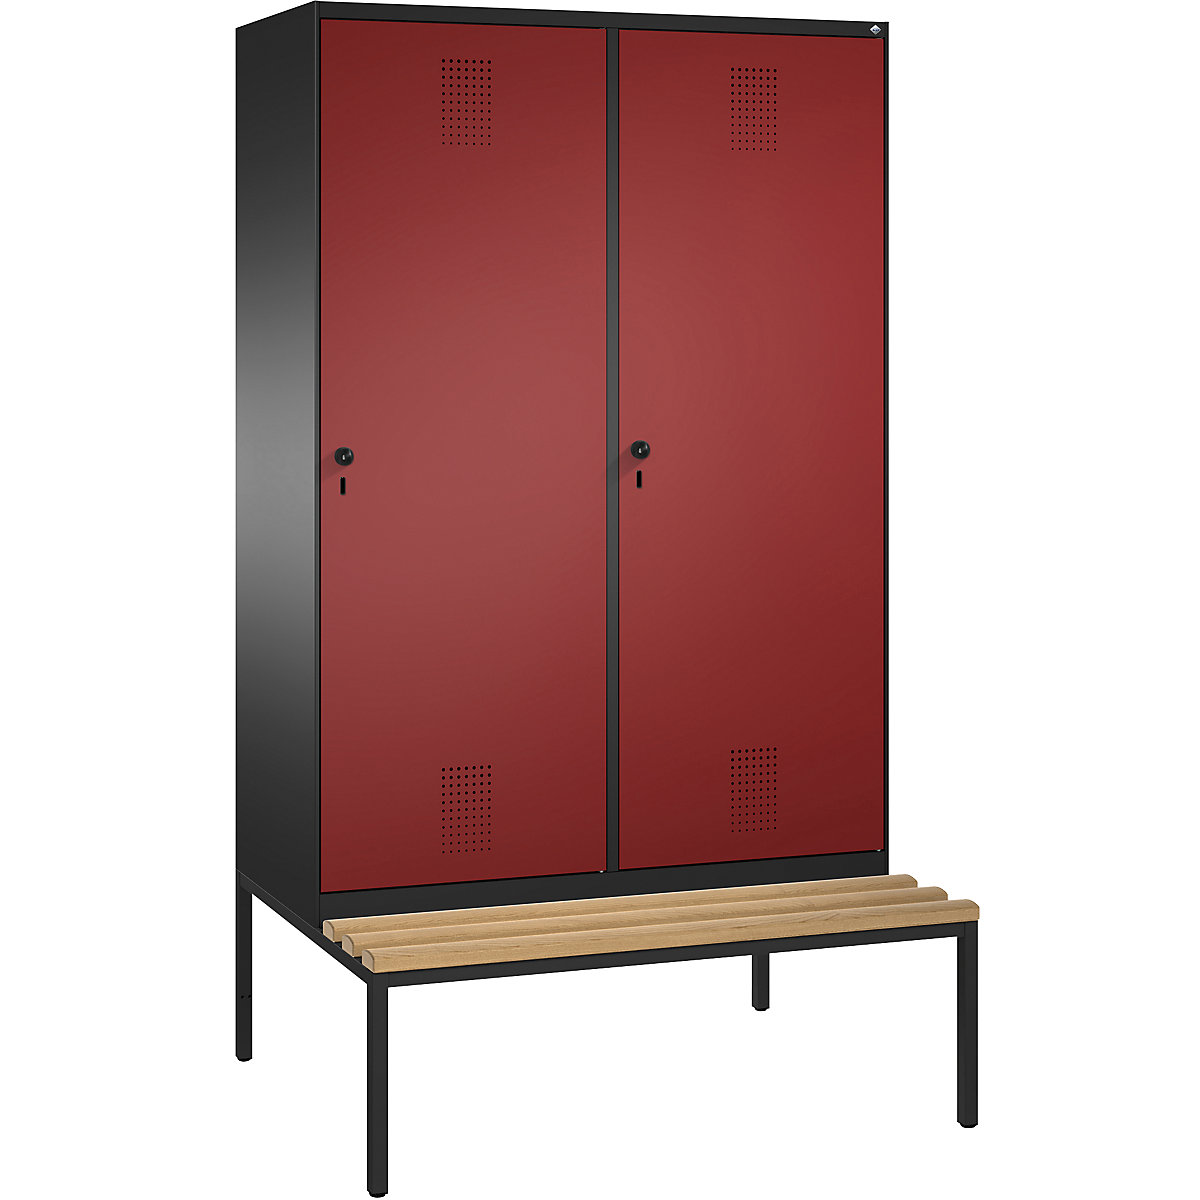 EVOLO cloakroom locker, with bench, door for 2 compartments – C+P, 4 compartments, 2 doors, compartment width 300 mm, black grey / ruby red-15